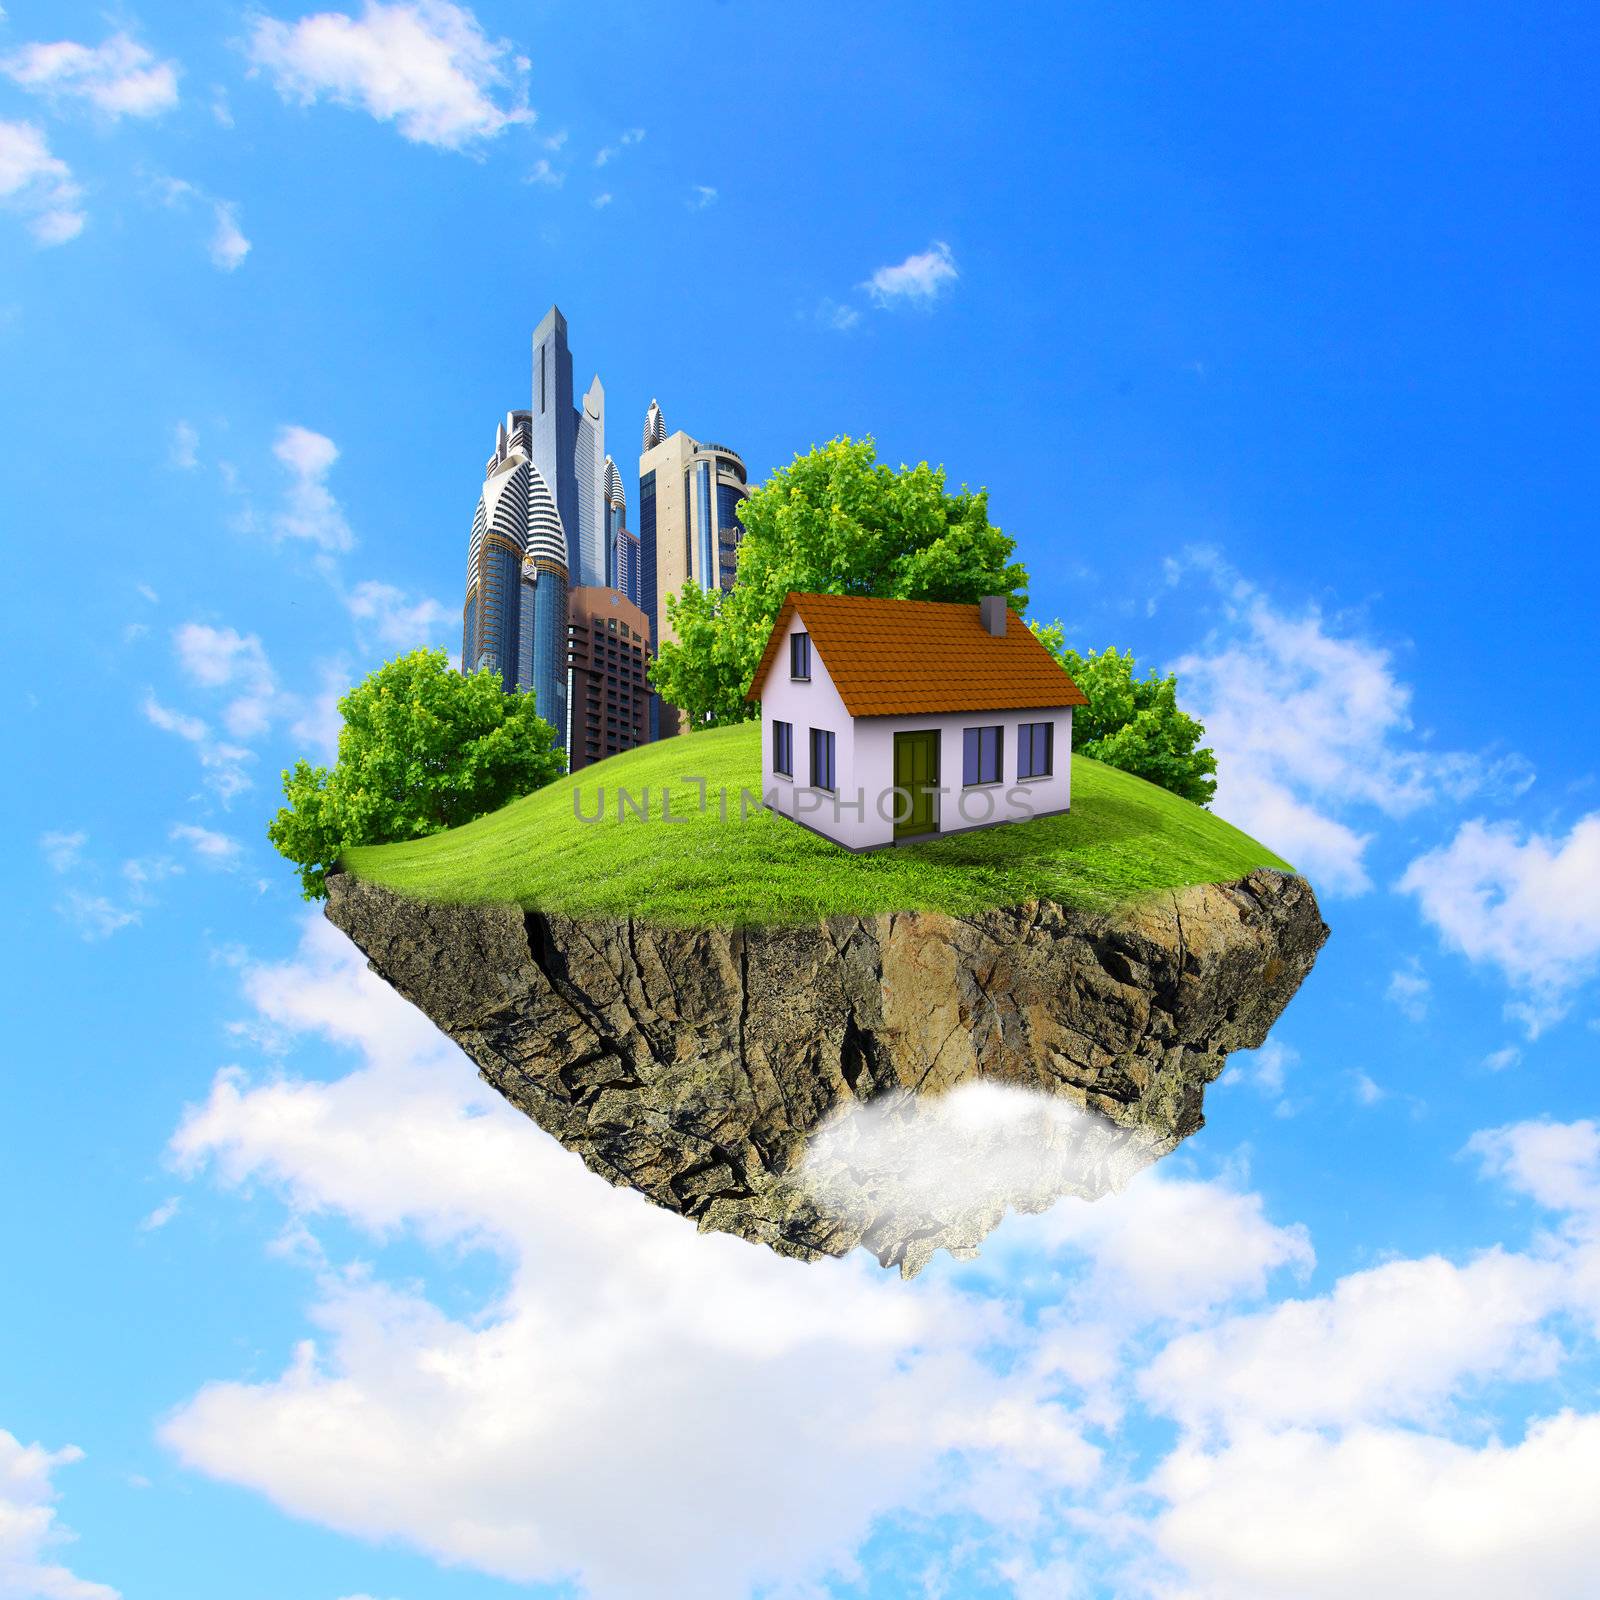 A piece of land in the air with house and tree. by sergey_nivens